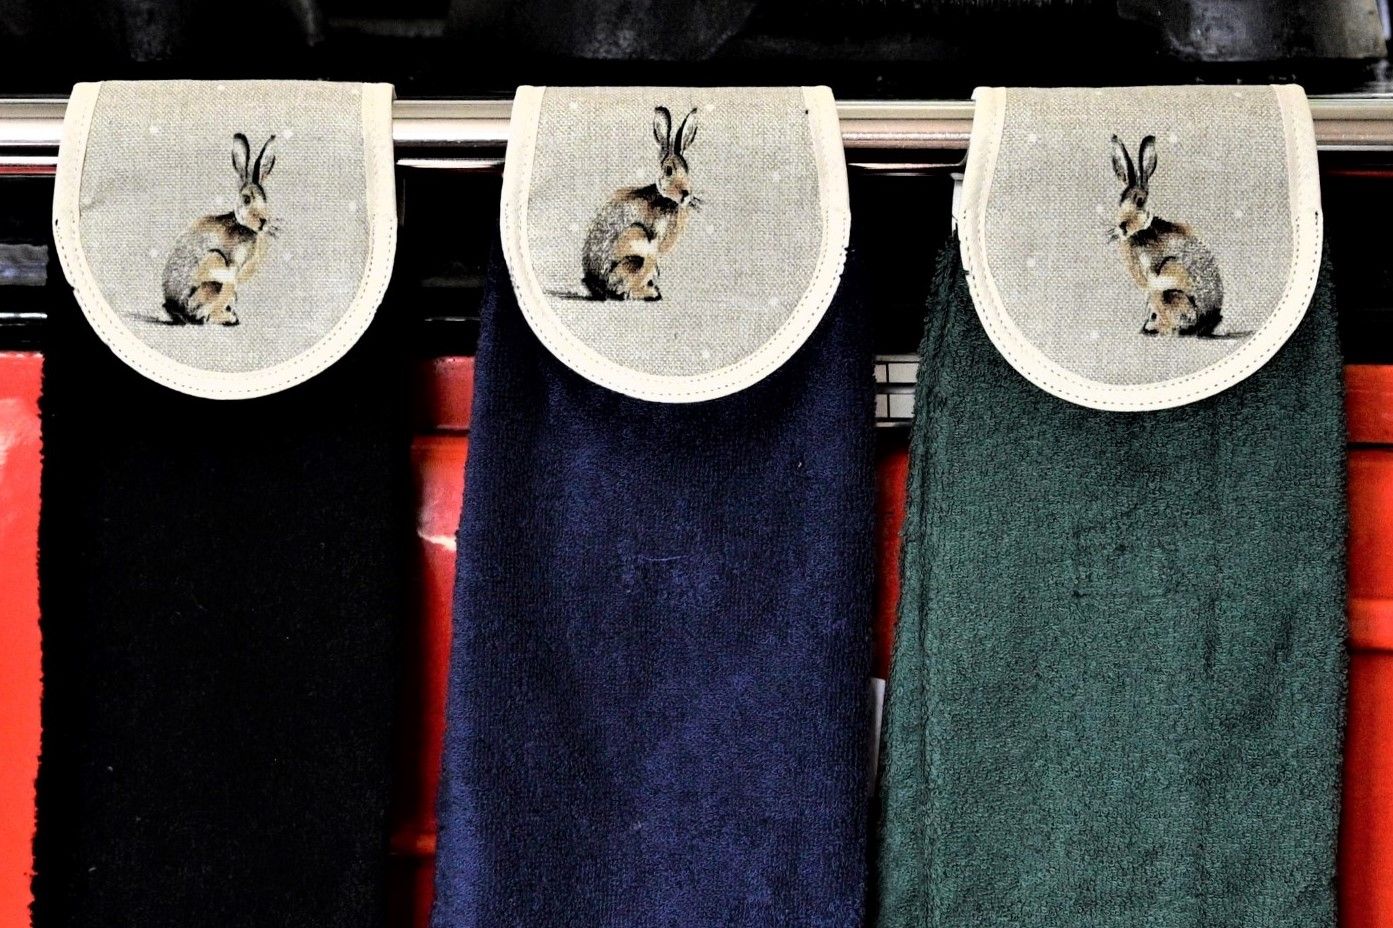 Hang ups, Kitchen towels, Hares with Black, Green or Navy Blue towel